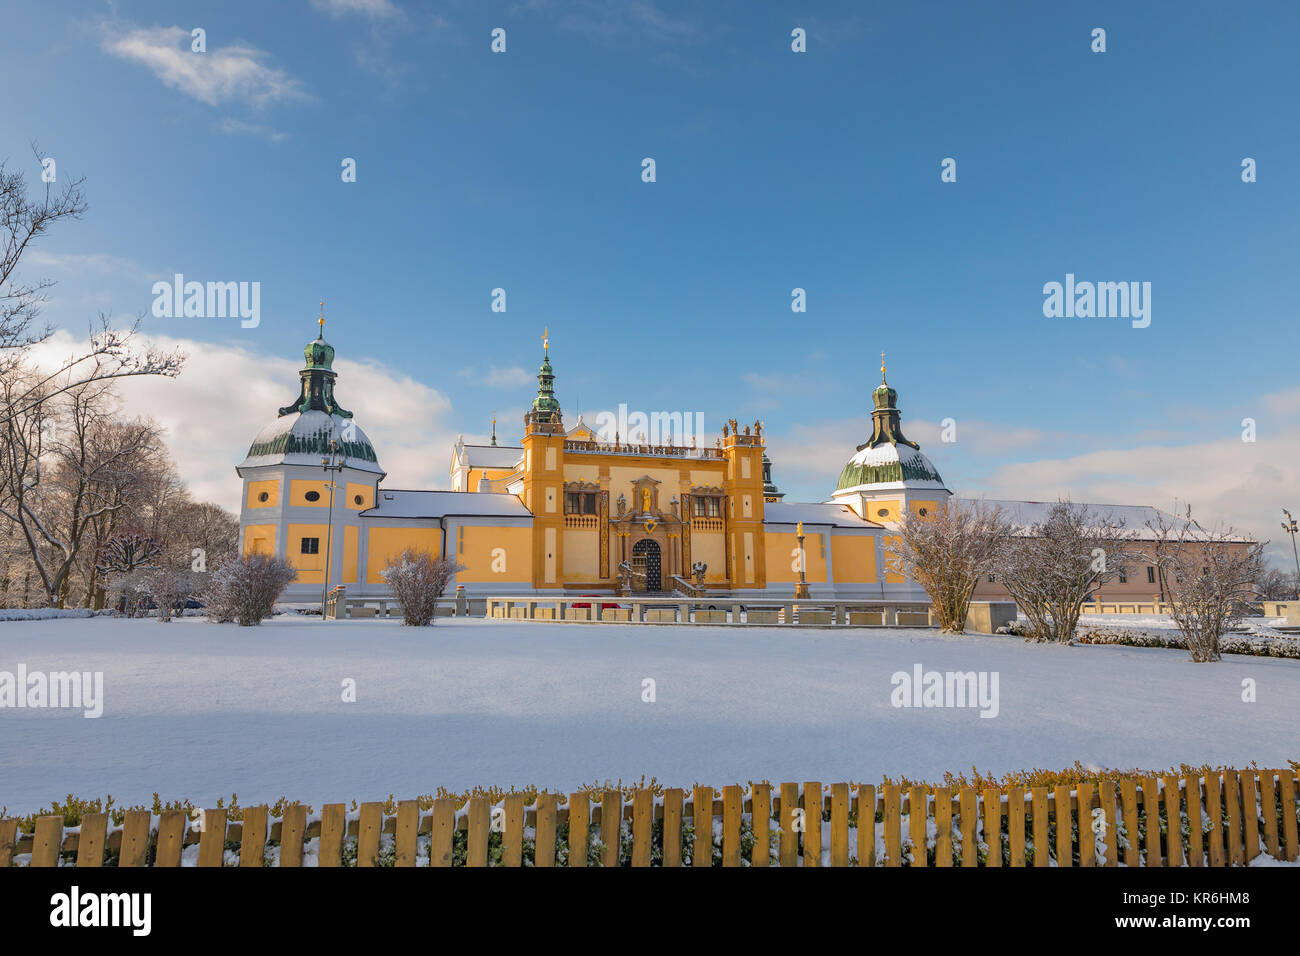 Church of baroque monastery at Svata Hora - The Holy Mountain. Monastery in winter time. Pribram, Czech Republic Stock Photo